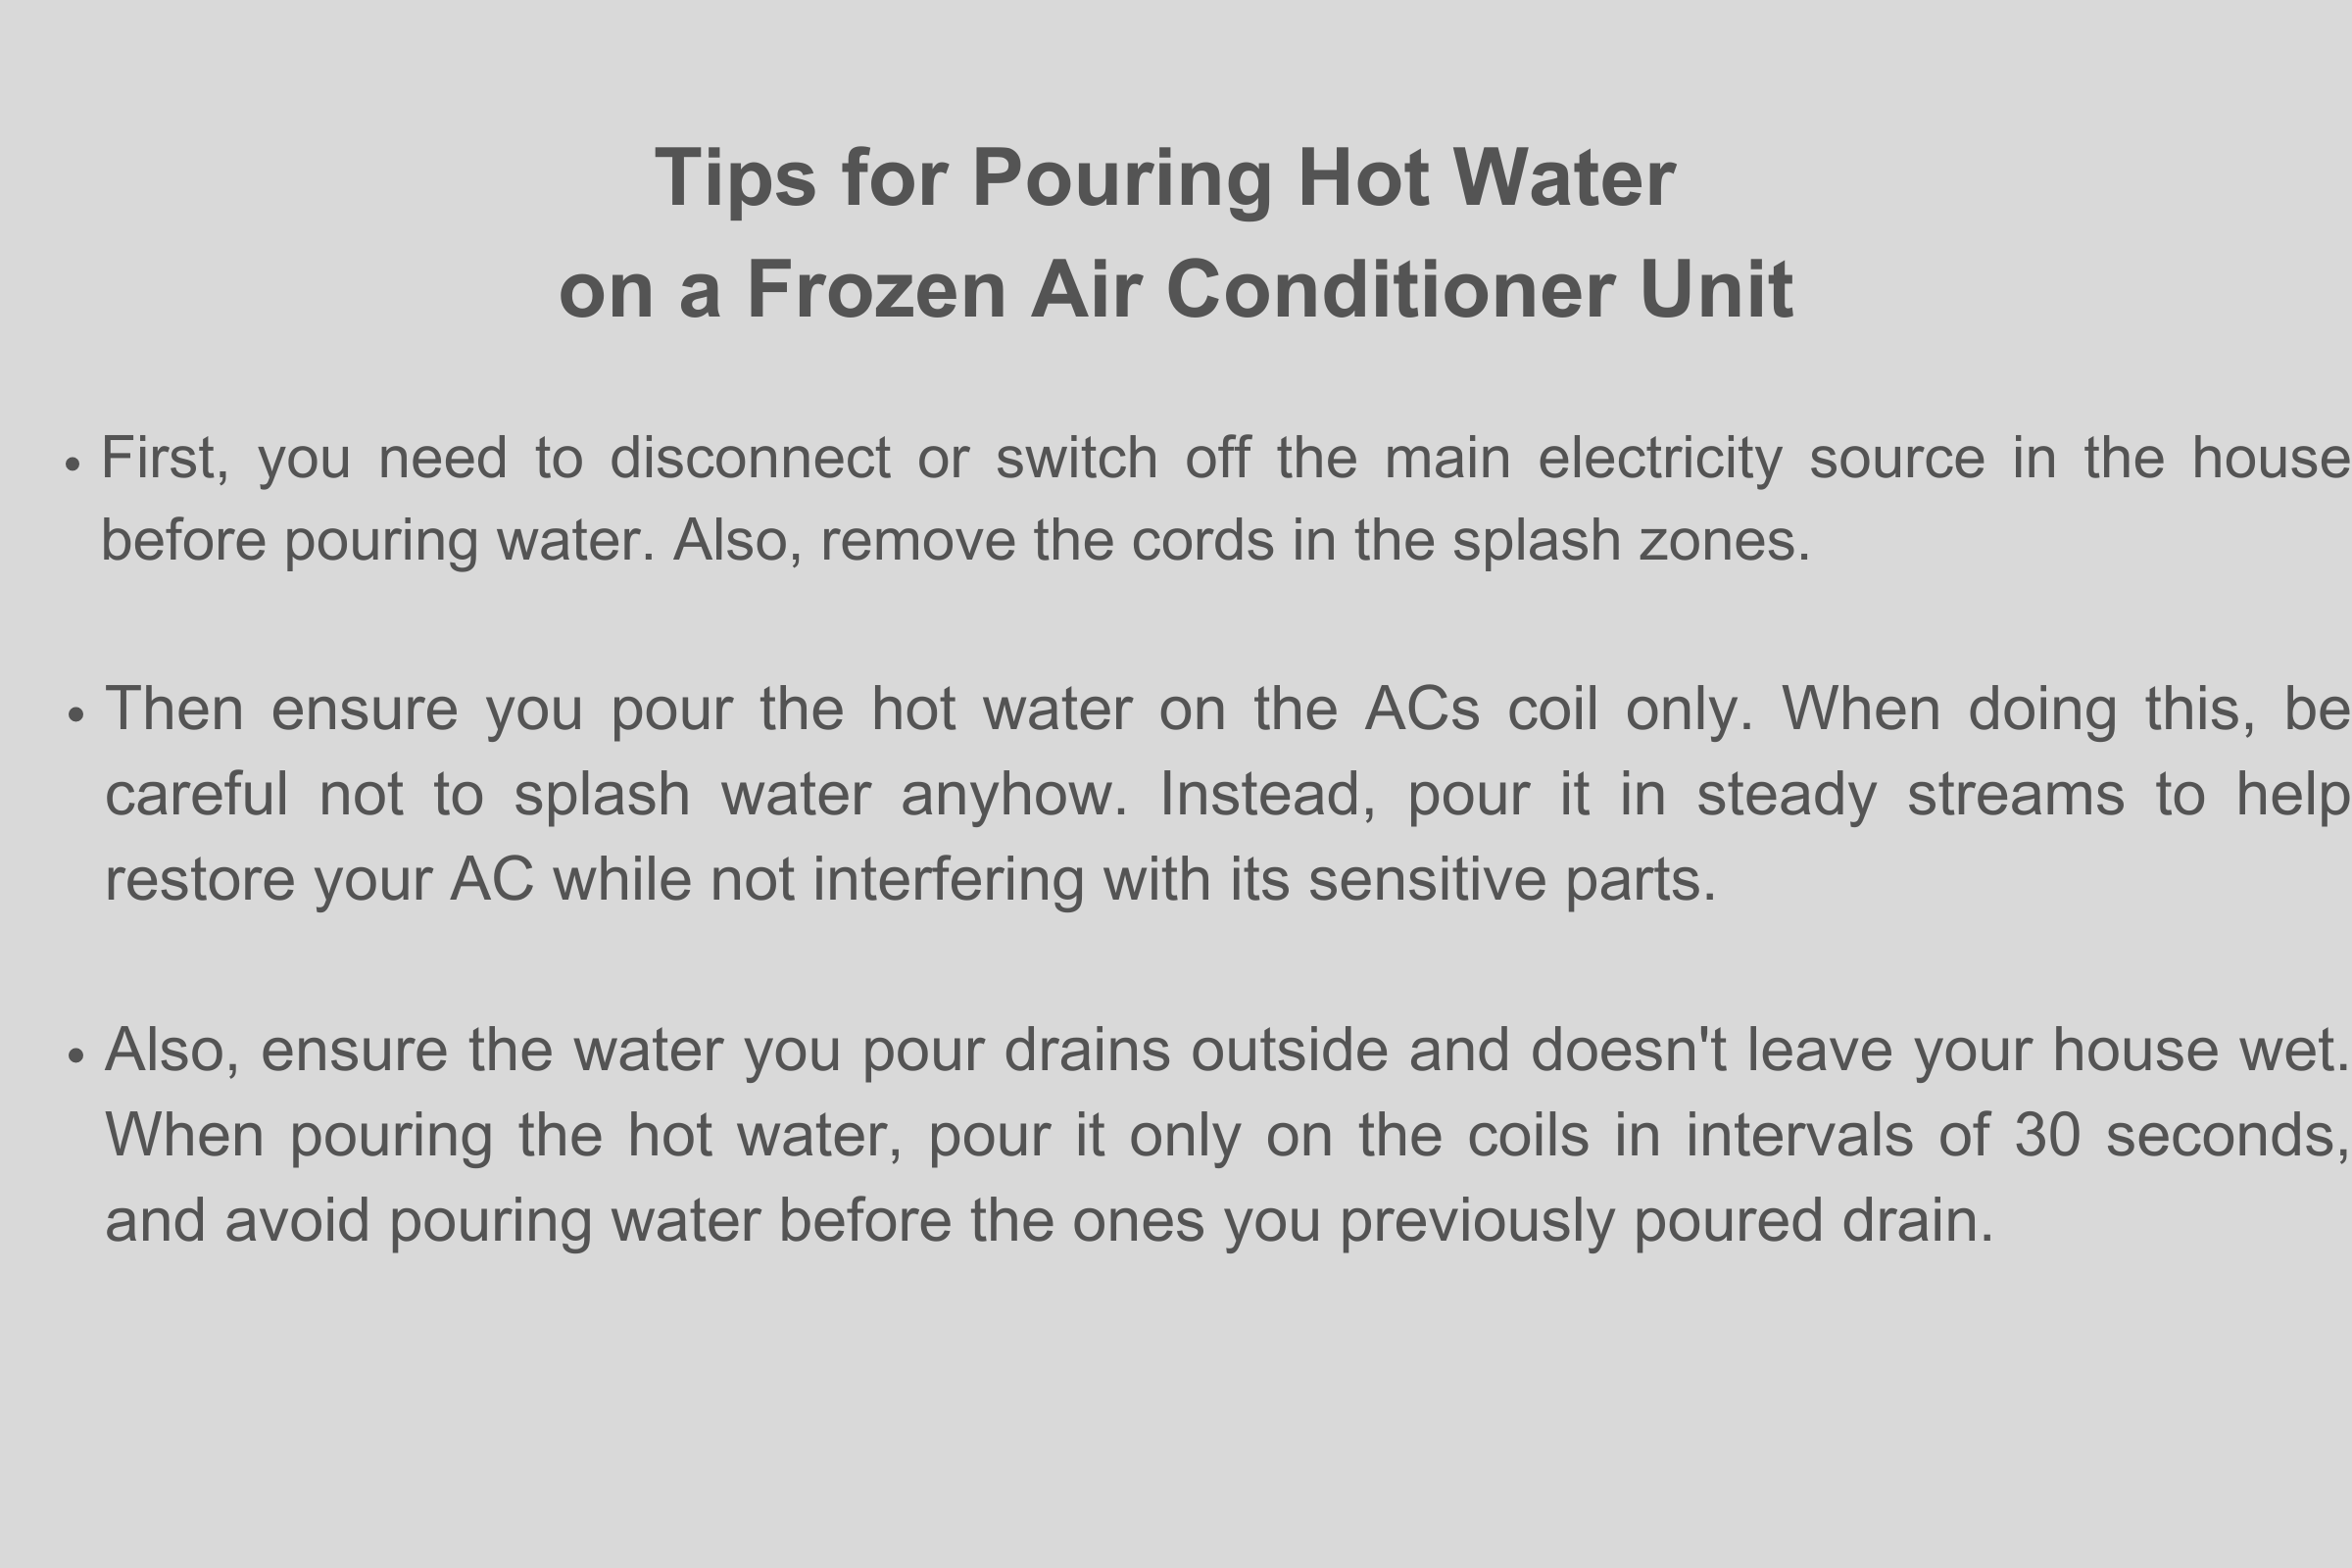 Can I pour hot water on a frozen air conditioner